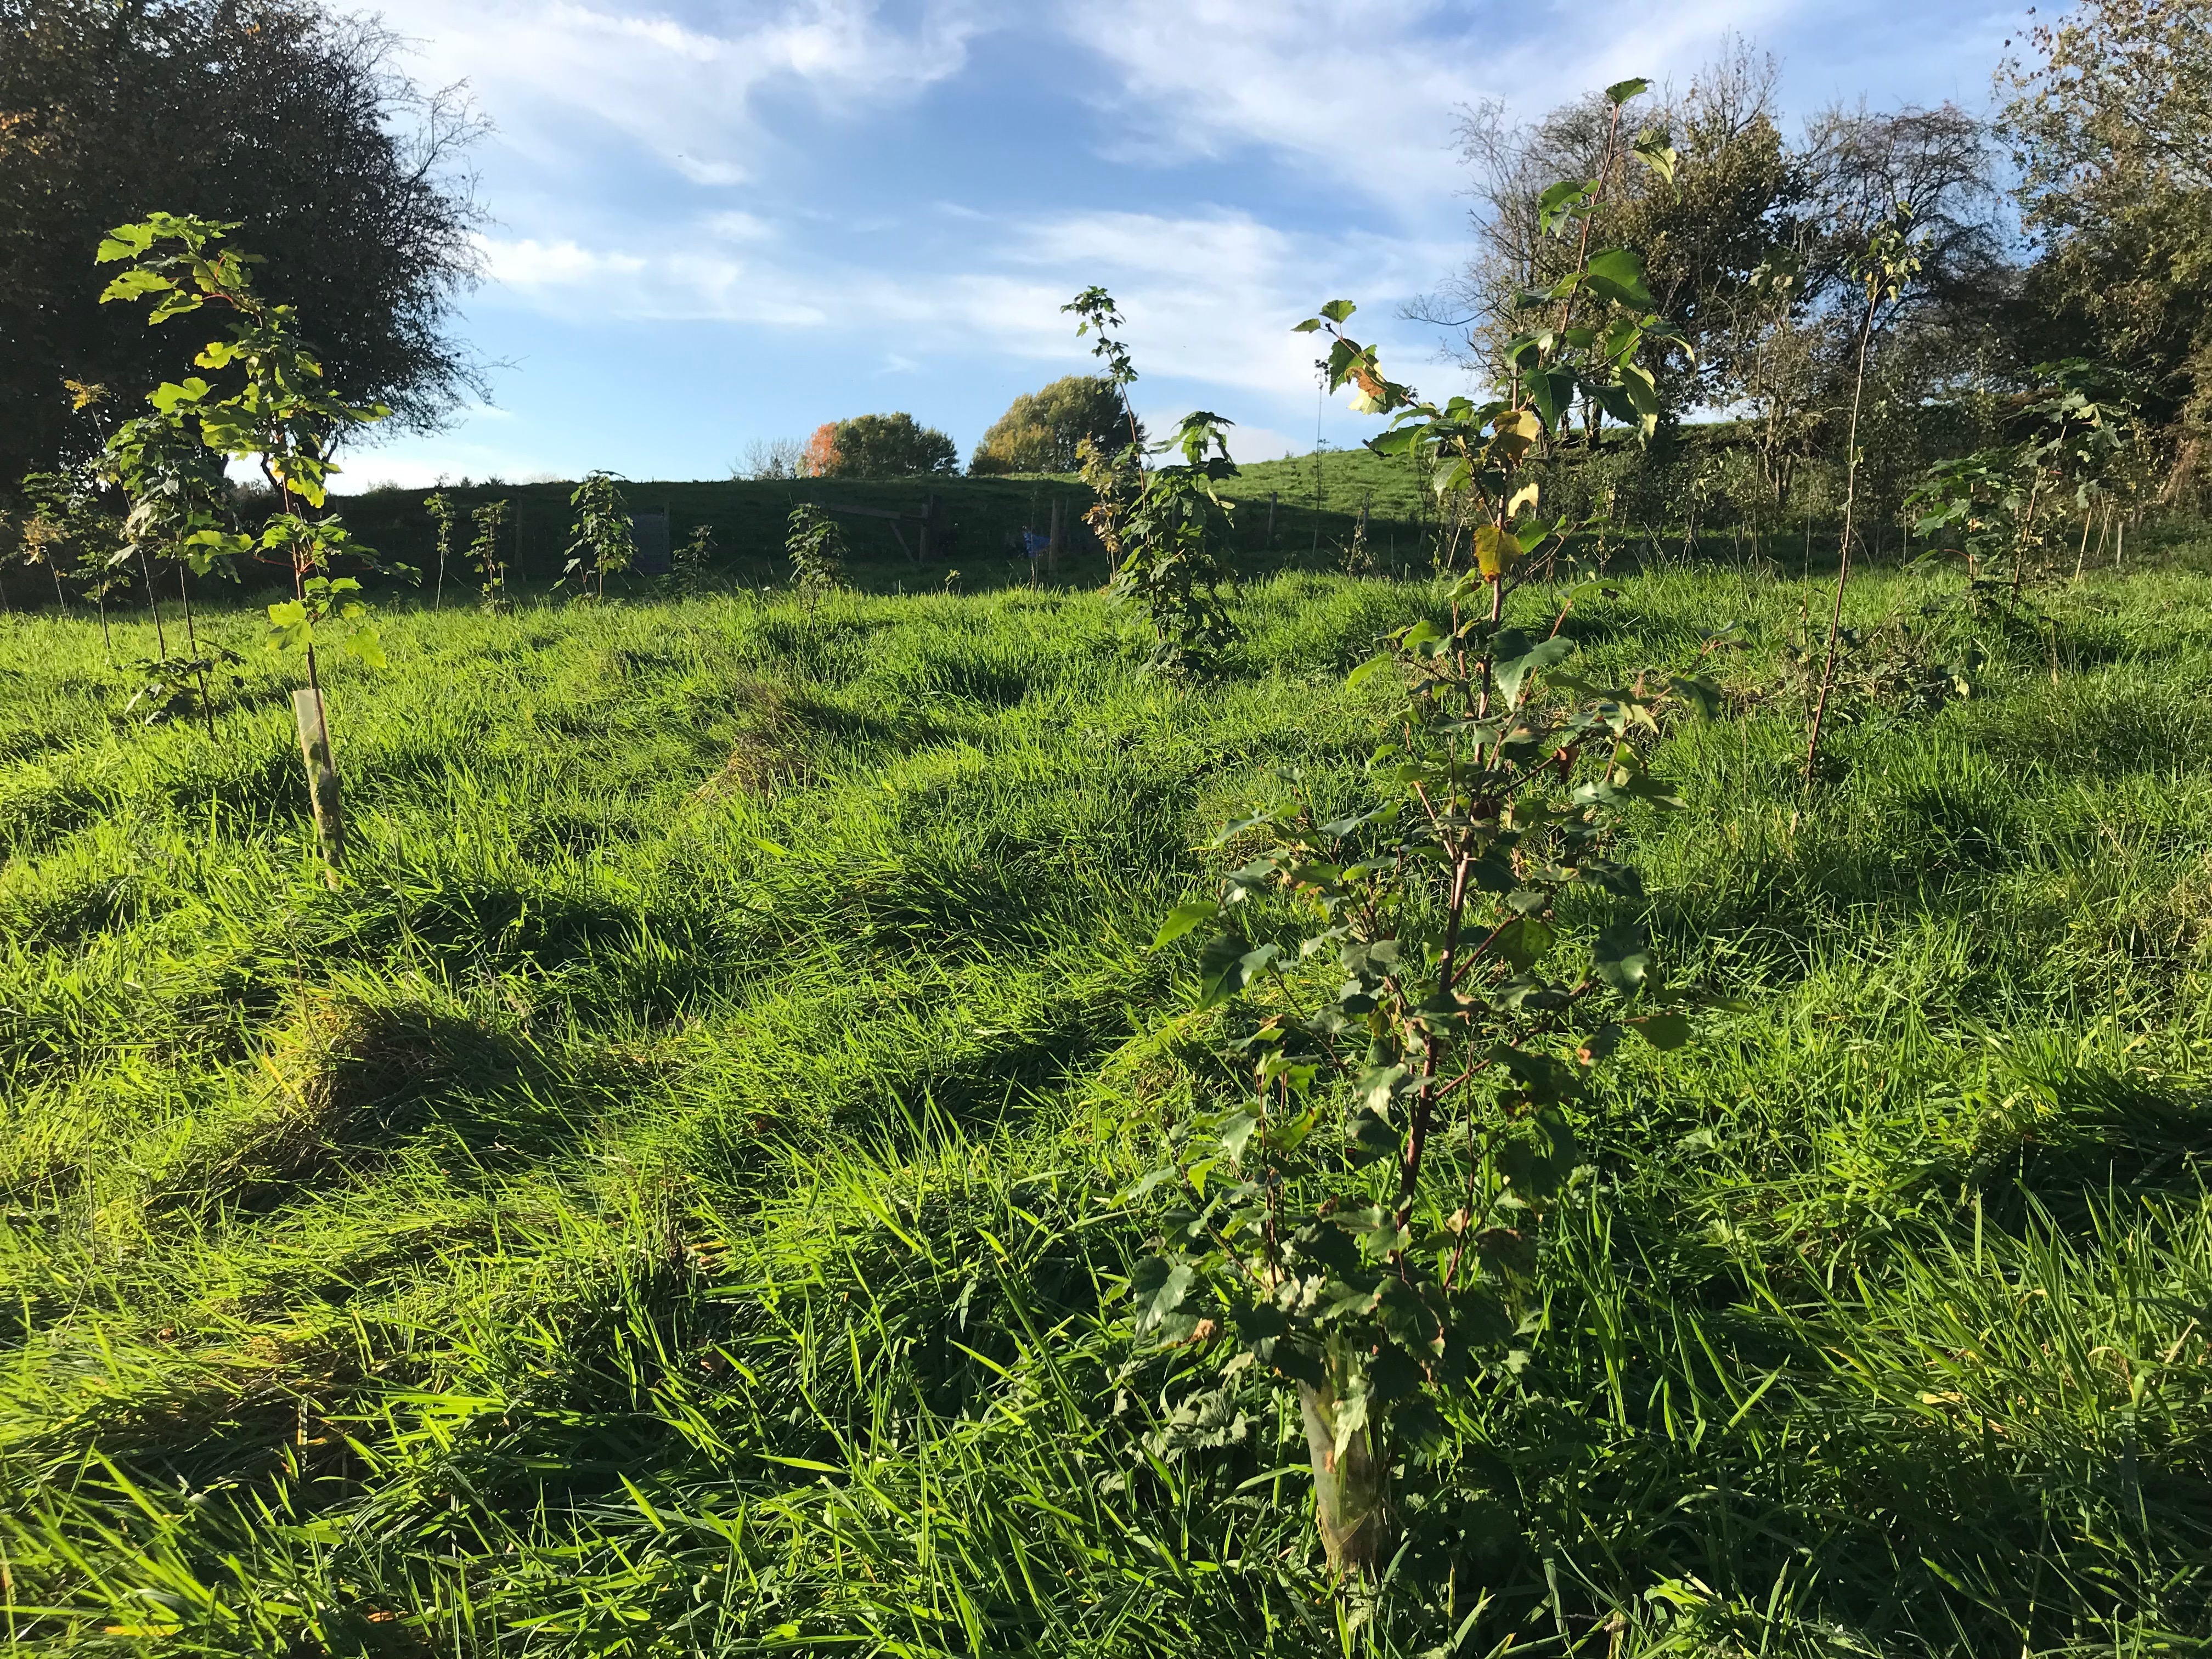 View of trees planted in a field for Woodland creation and carbon offsetting